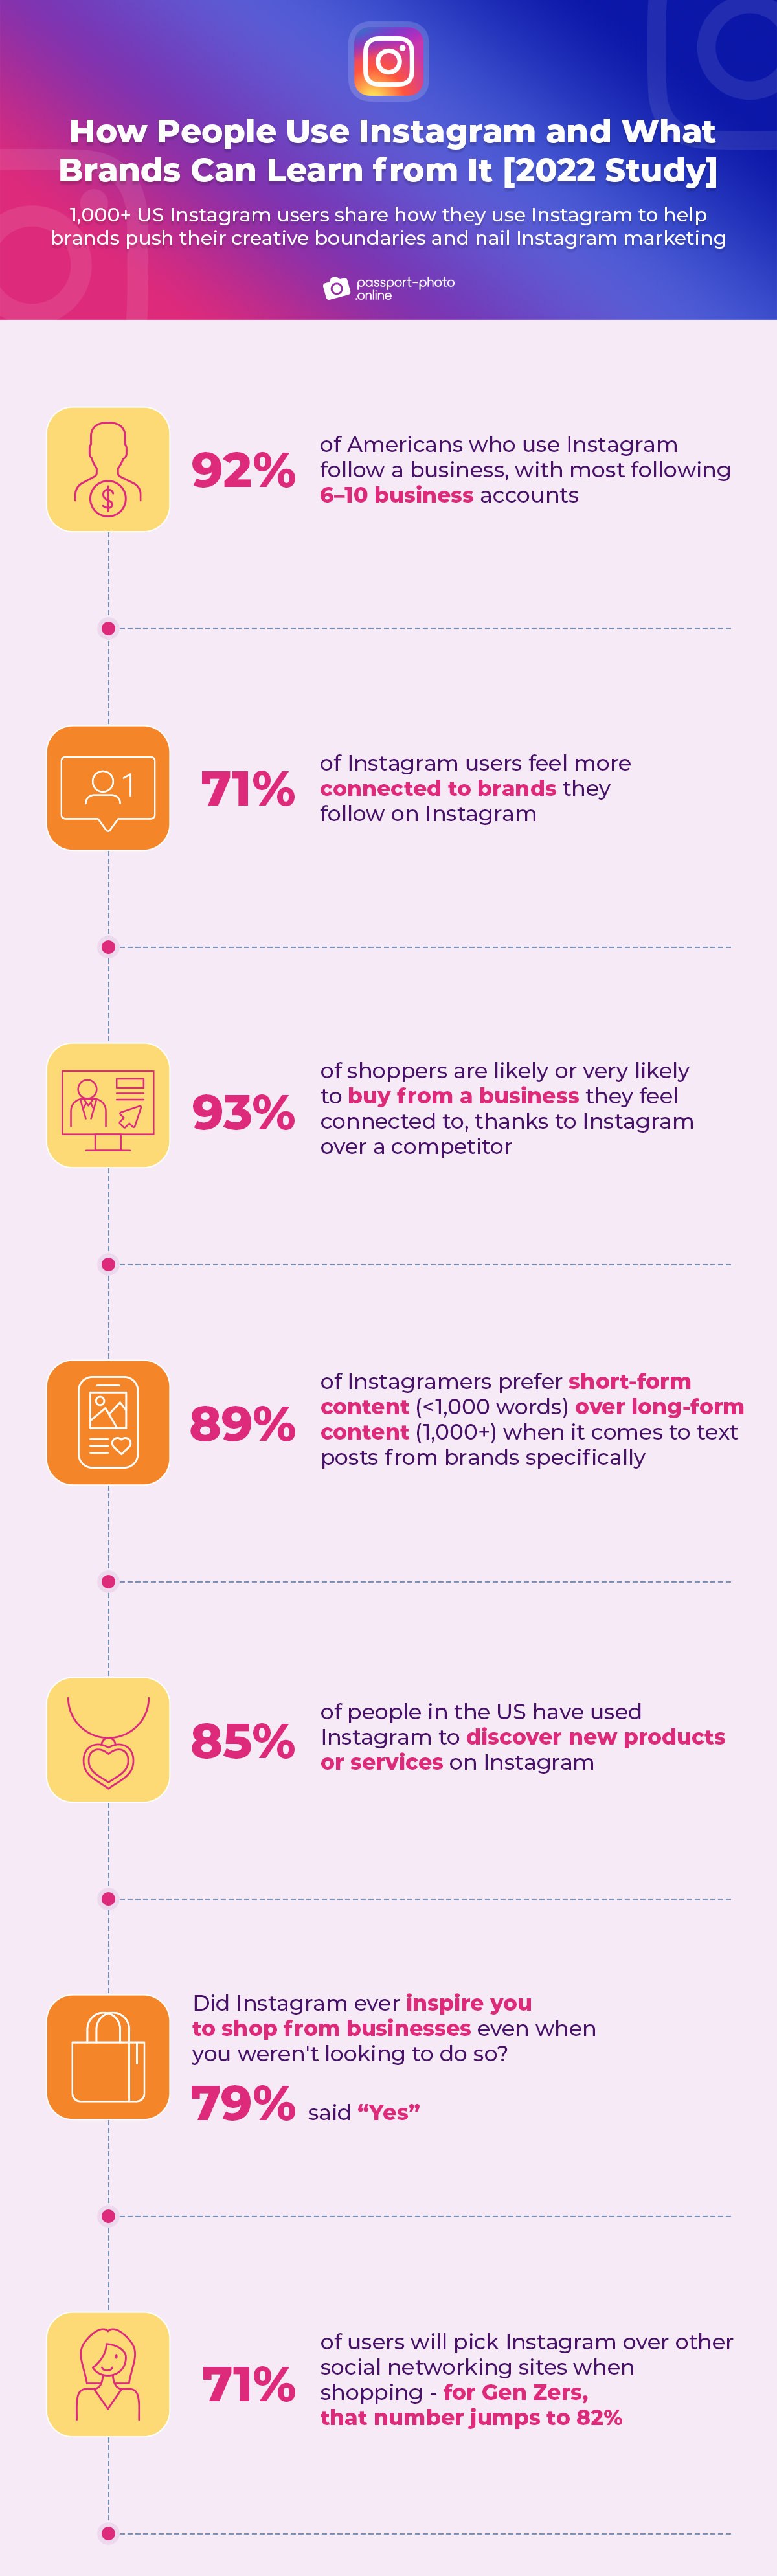 how people use Instagram and what brands can learn from it (key takeaways)